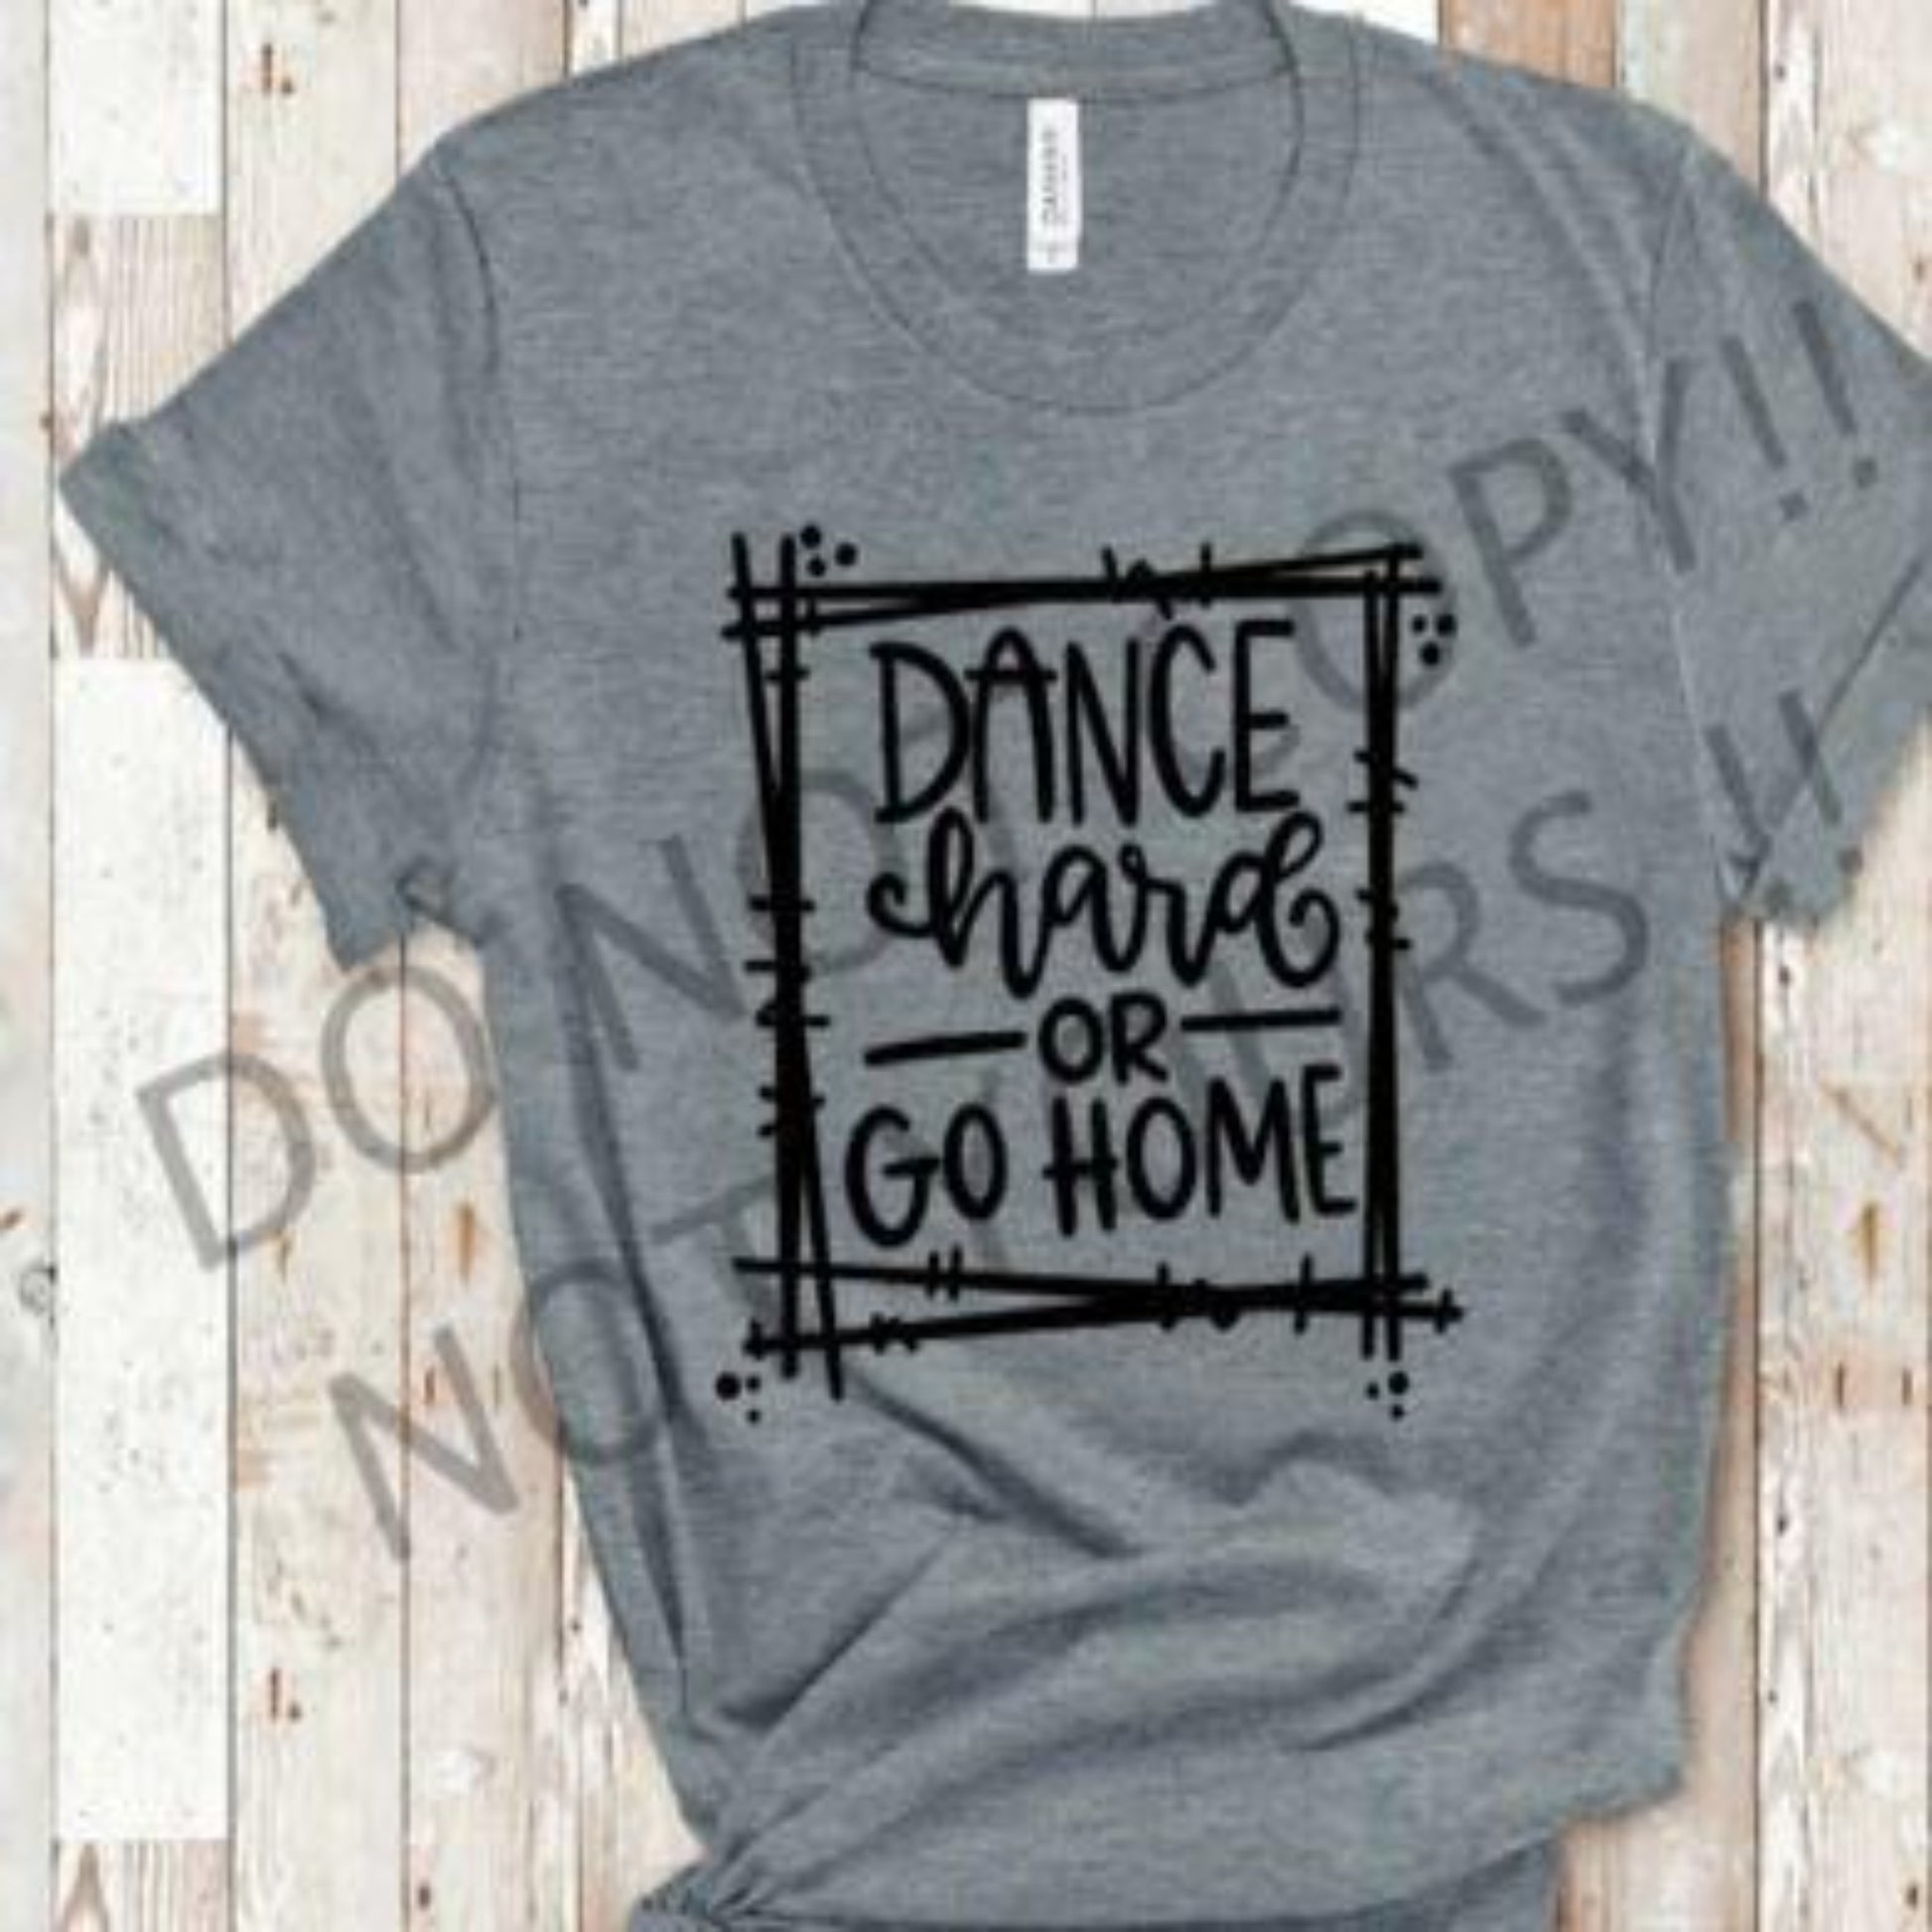 dance_hard or go_home specialty tee casual shirt everyday tshirt